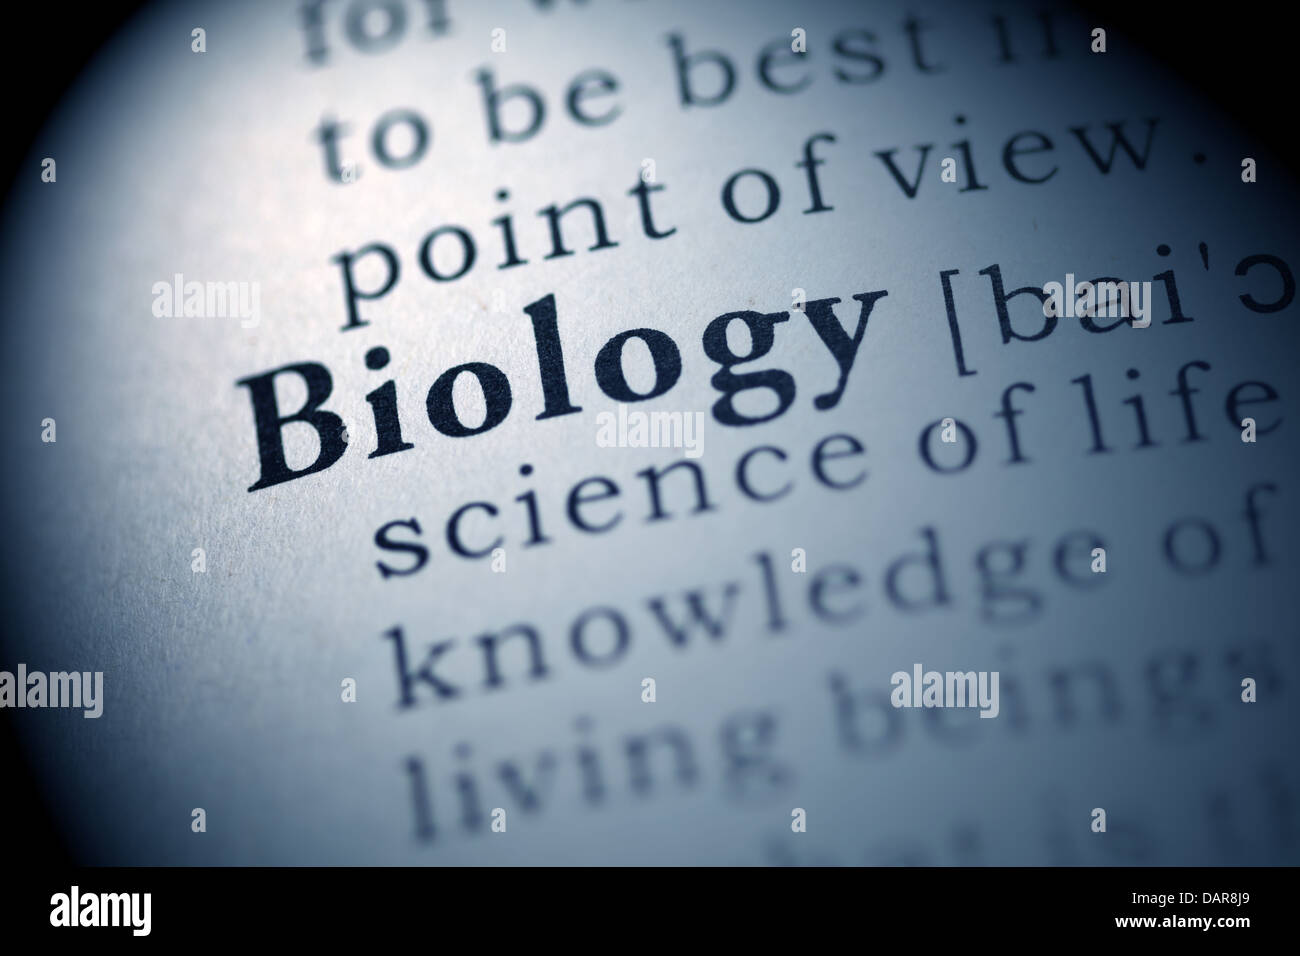 Fake Dictionary, Dictionary definition of the word Biology. Stock Photo